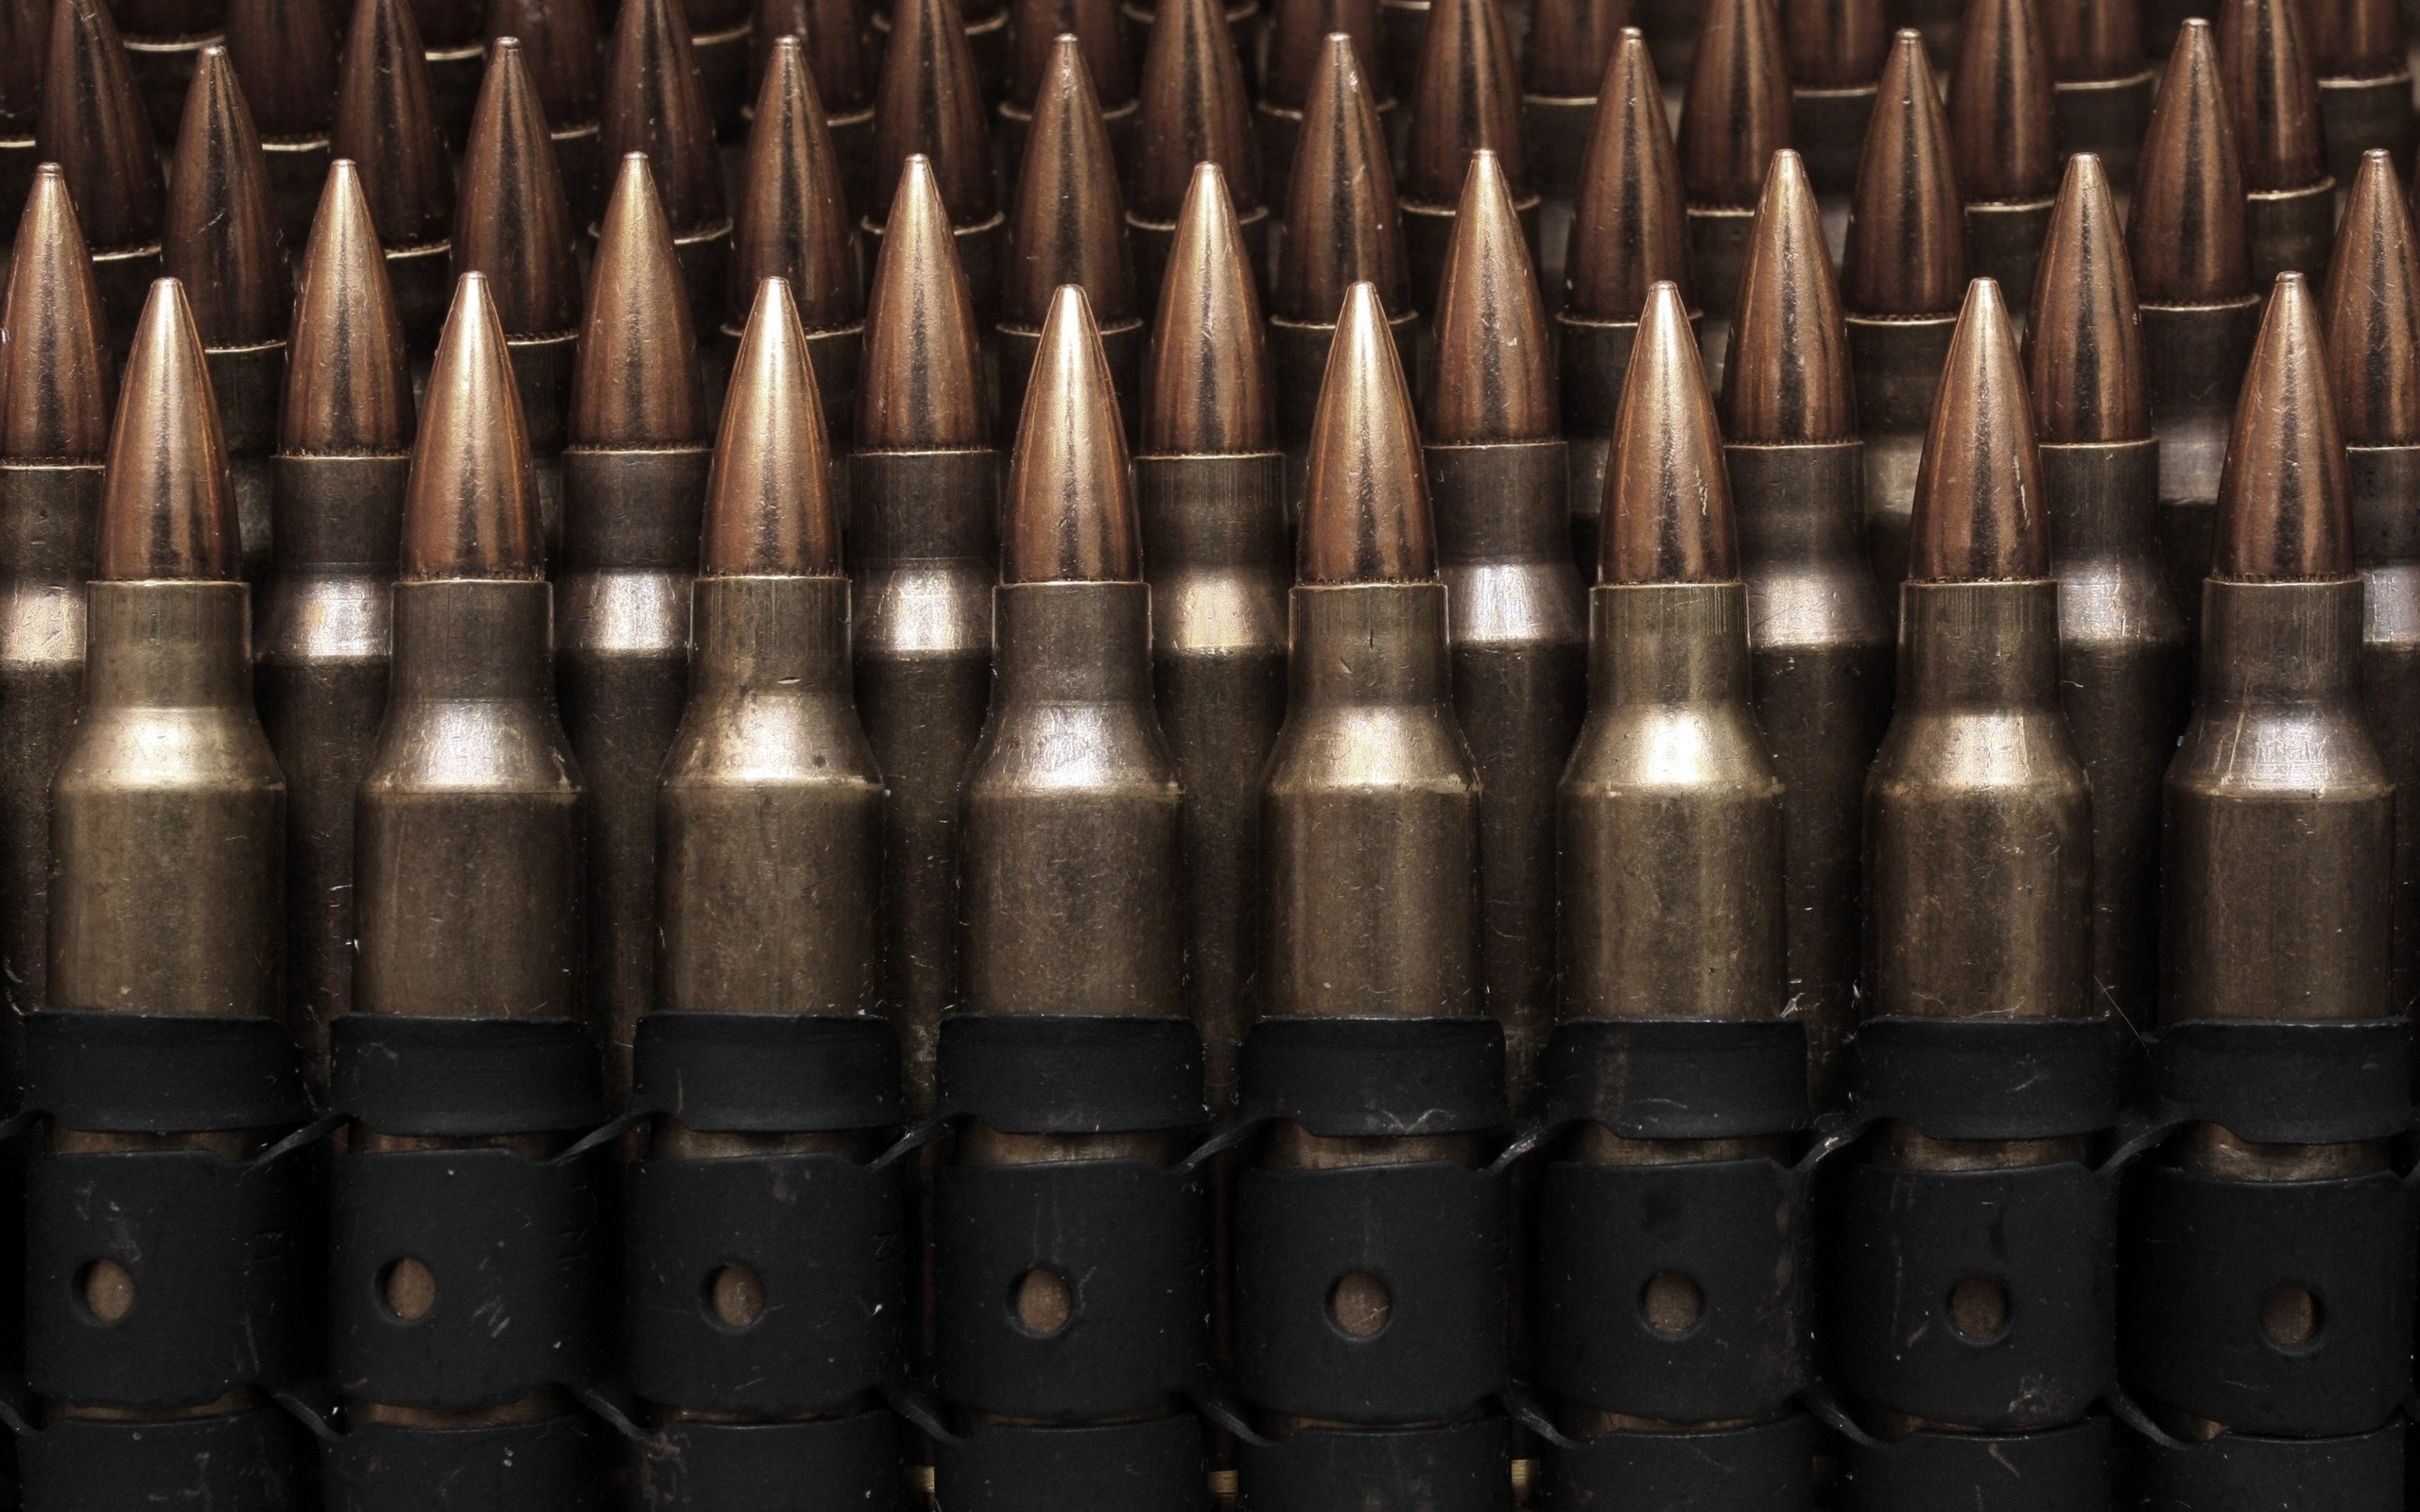 General 2560x1600 ammunition pattern weapon military